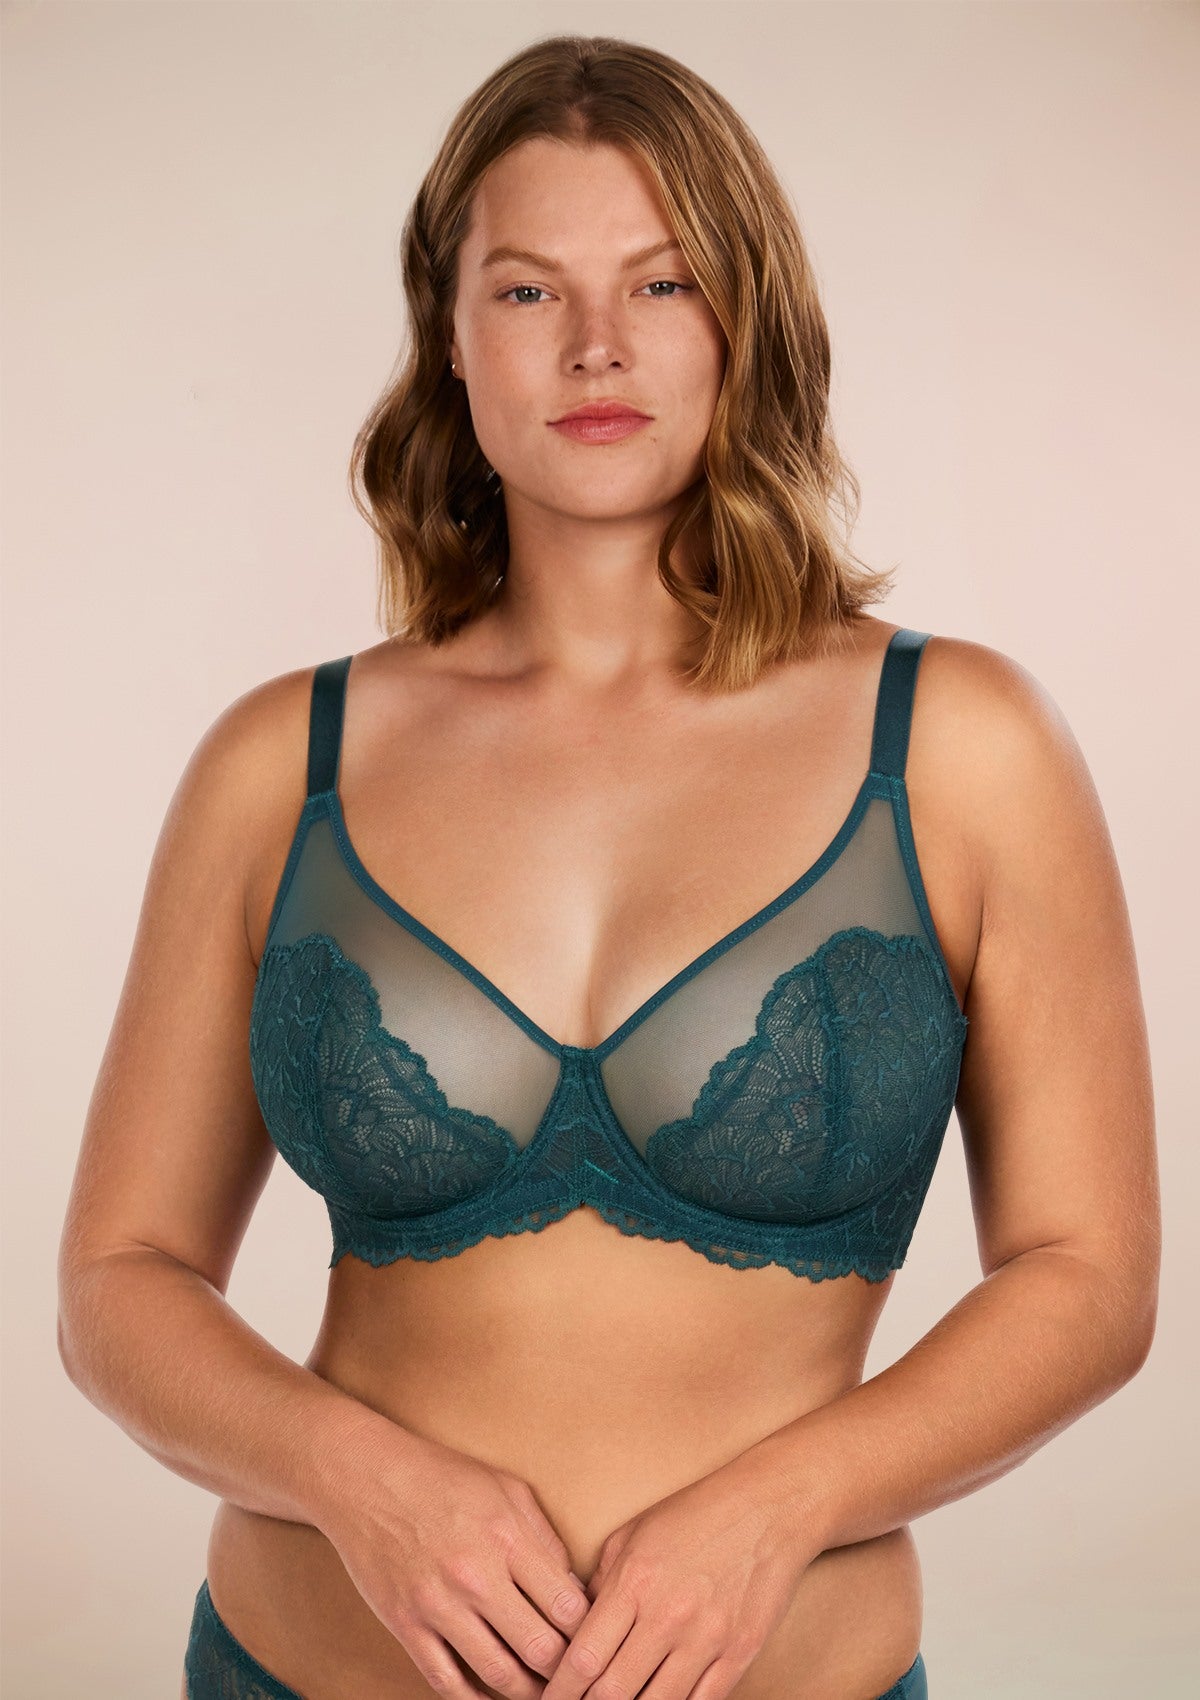 HSIA Blossom Full Figure See-Through Lace Bra For Side And Back Fat - Biscay Blue / 38 / D